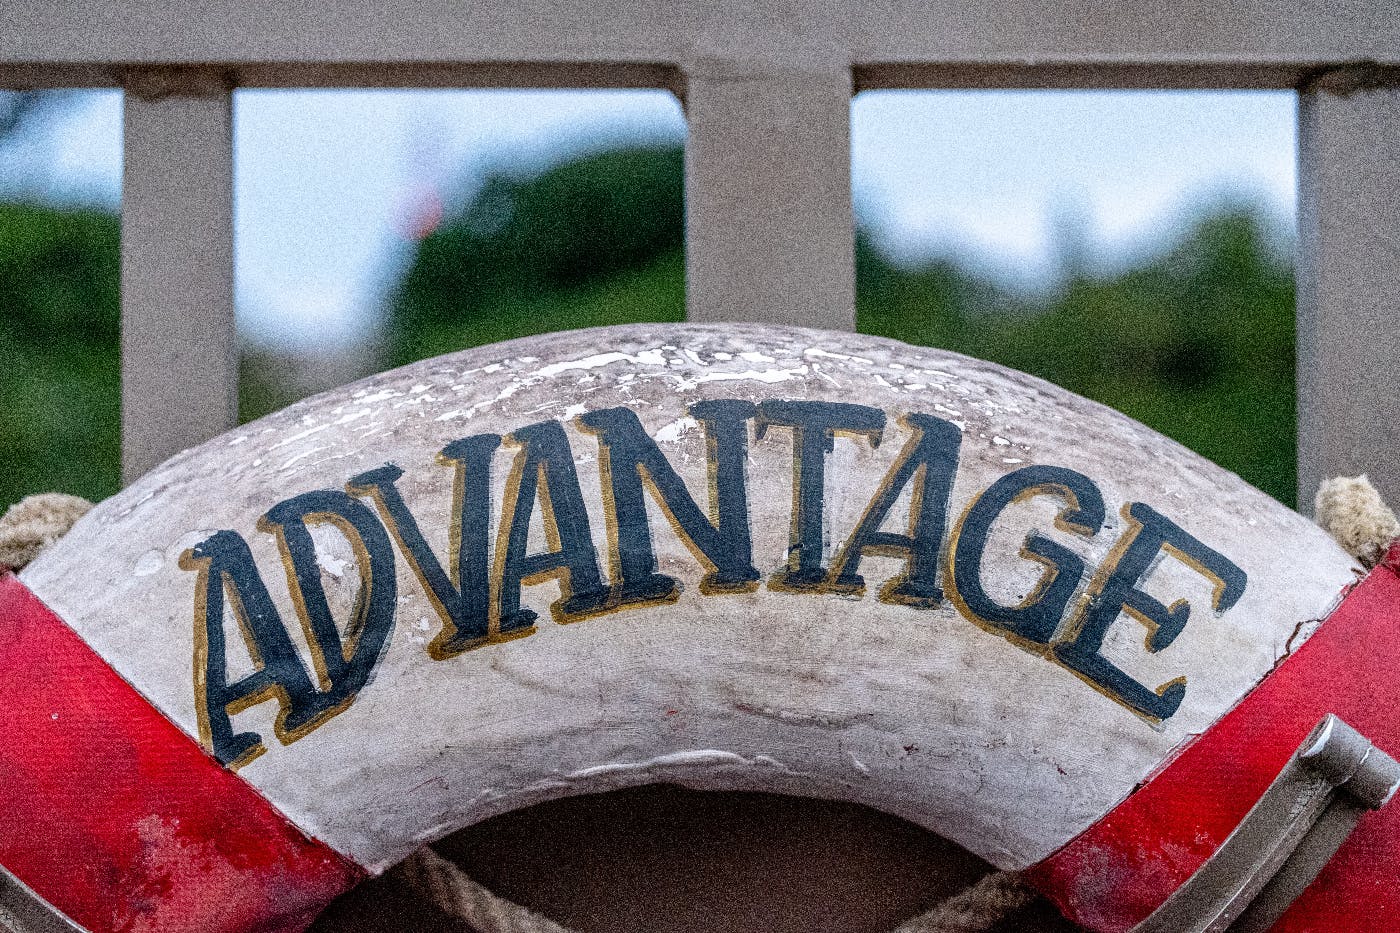 A life perserver with the word Advantage written on it